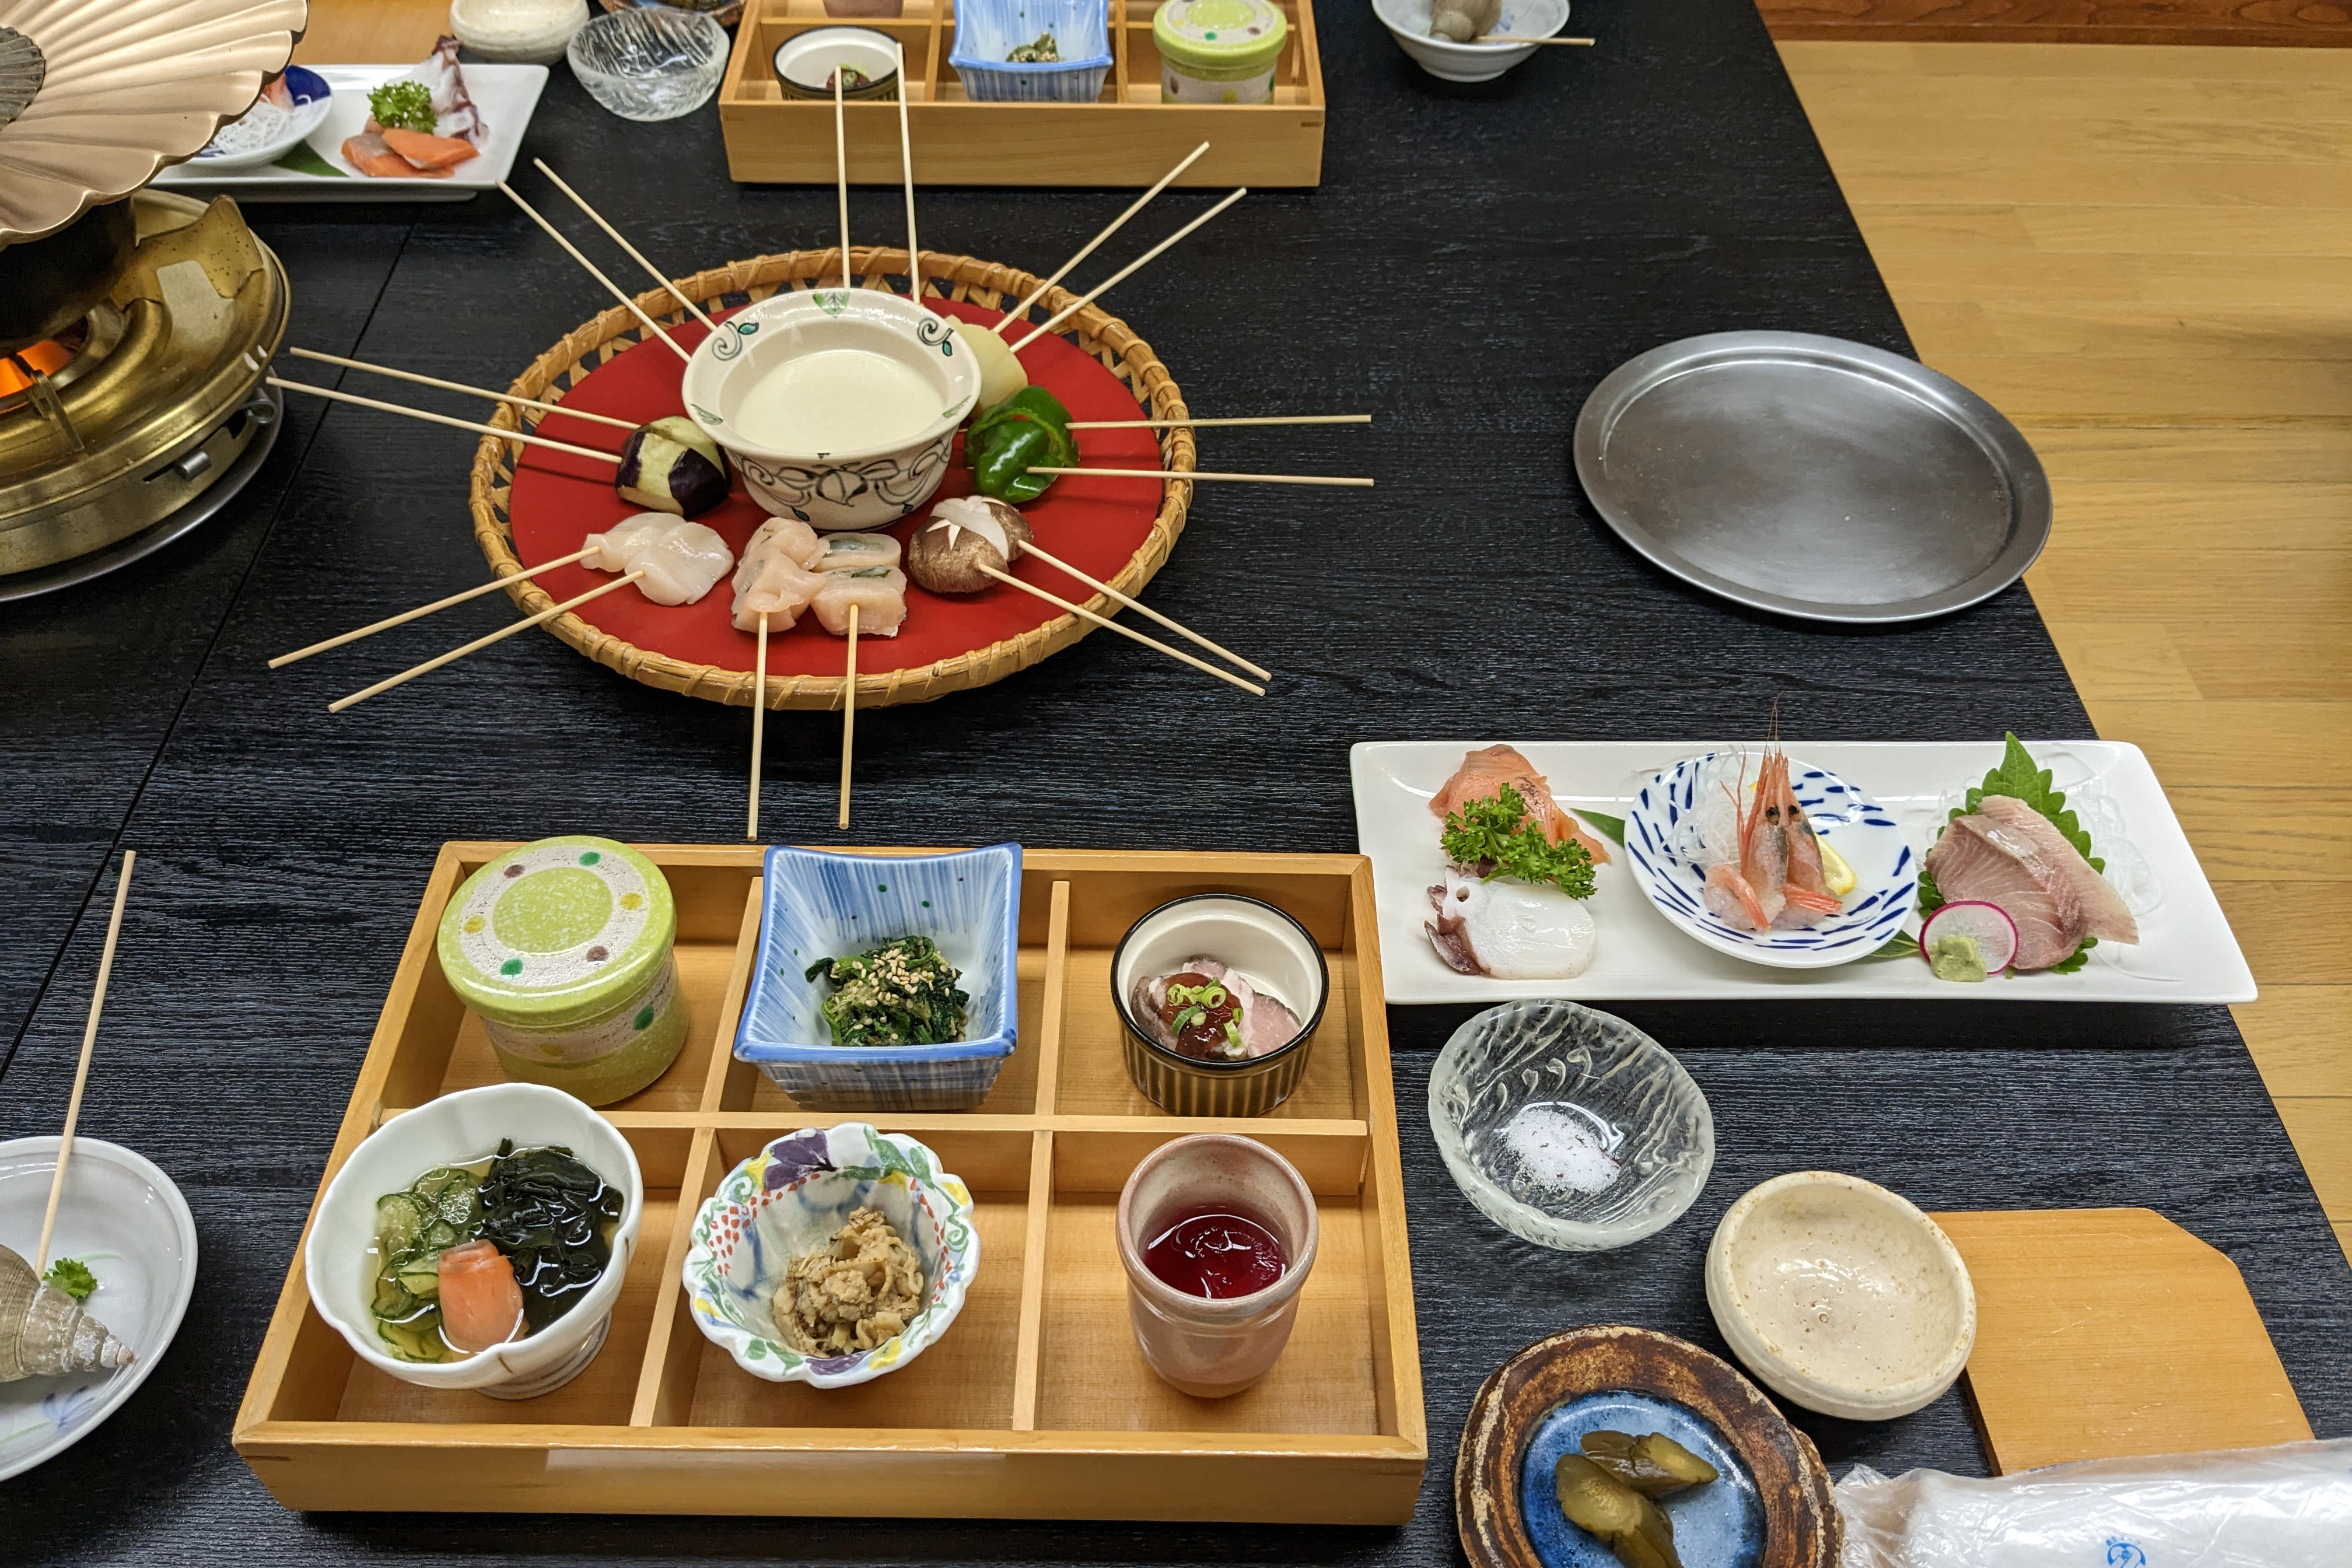 A feast is laid out on the table including meat and seafood on skewers, sashimi and small bowls.